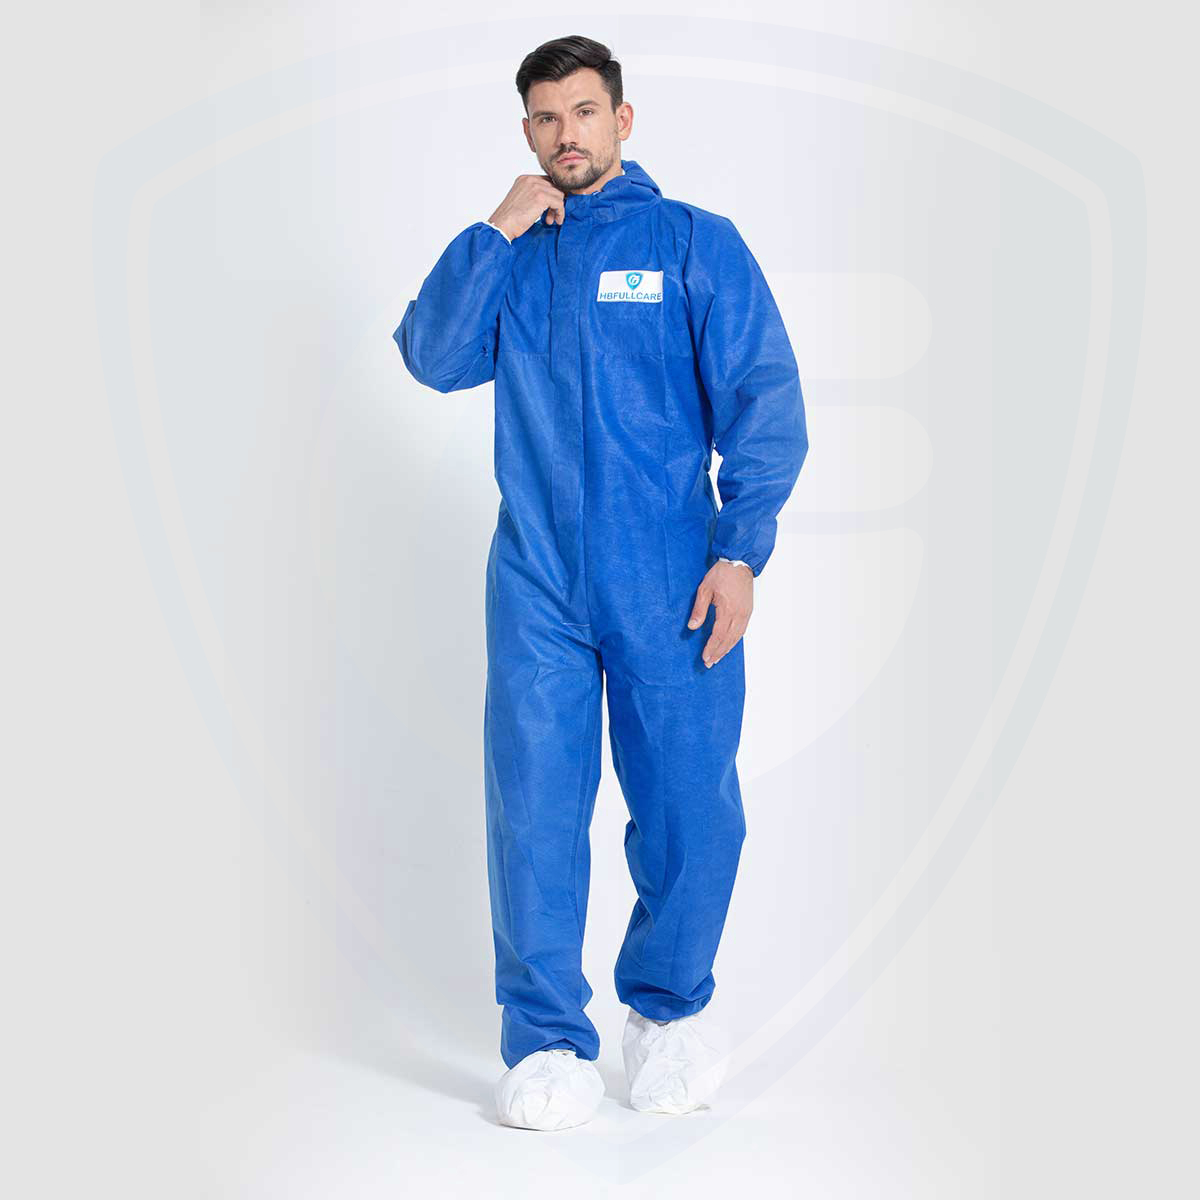 Lightweight Breathable Disposable Protective Coveralls for Spray Painting Blue 